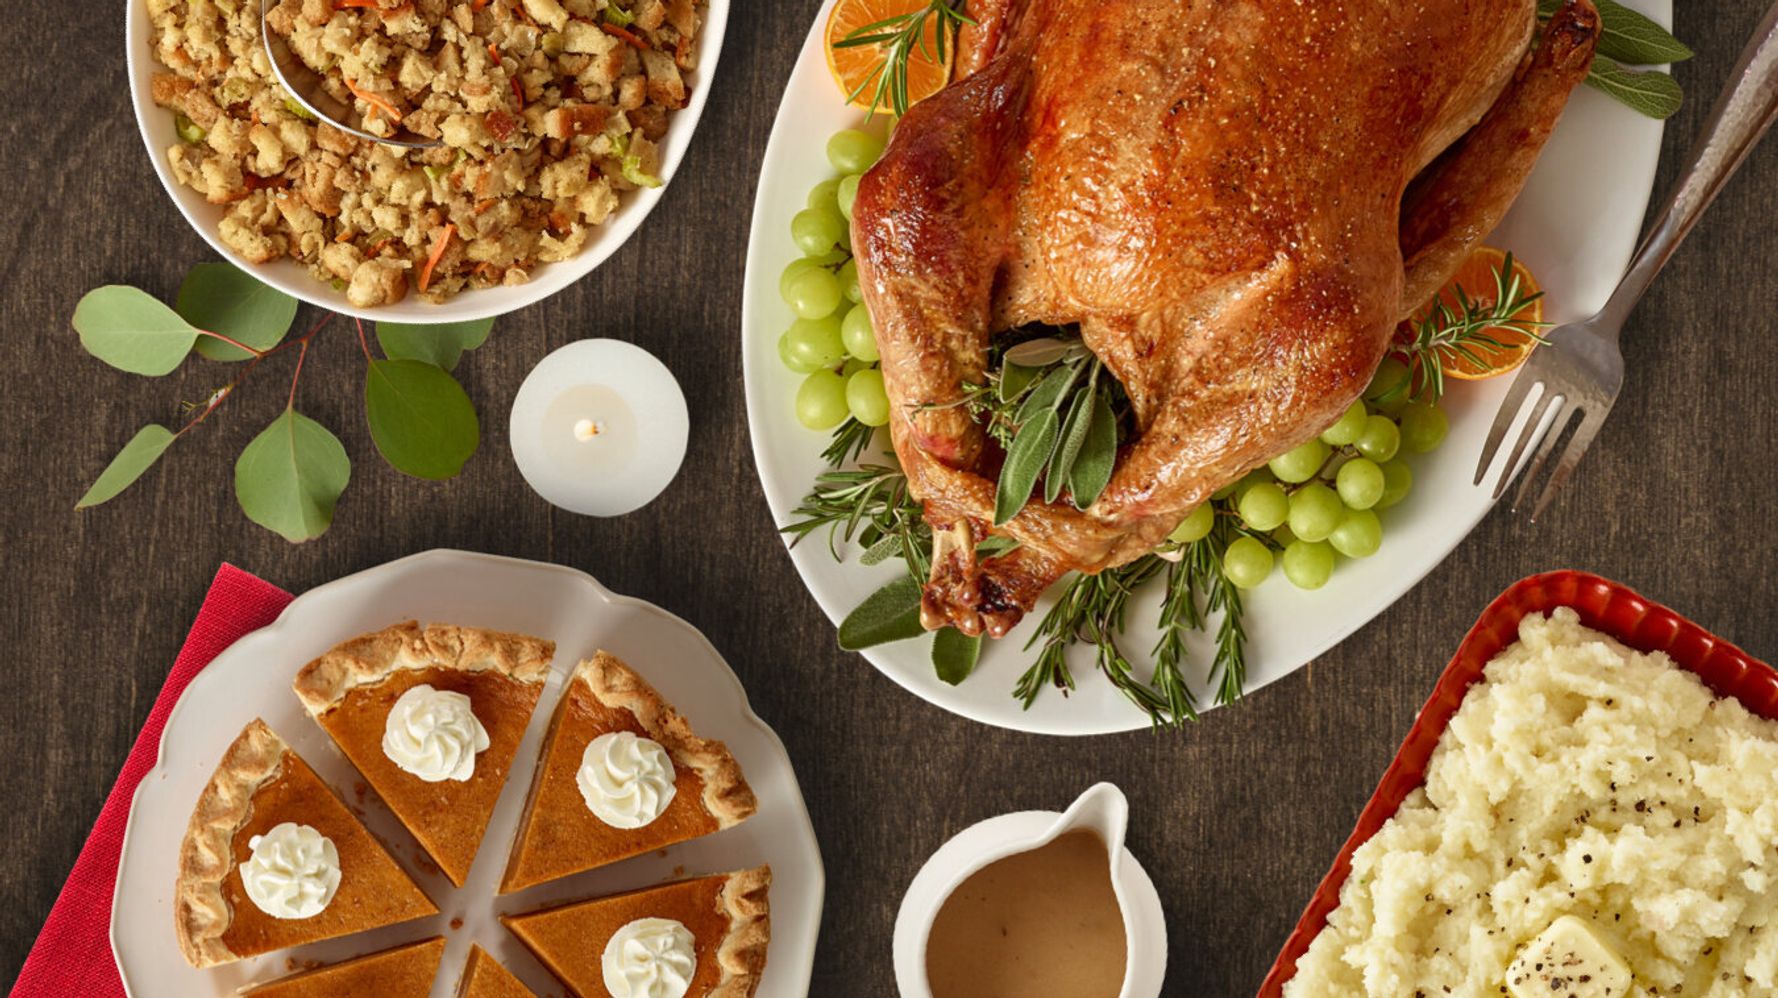 We Reviewed Home Chef’s Thanksgiving Meal Kit For This Year